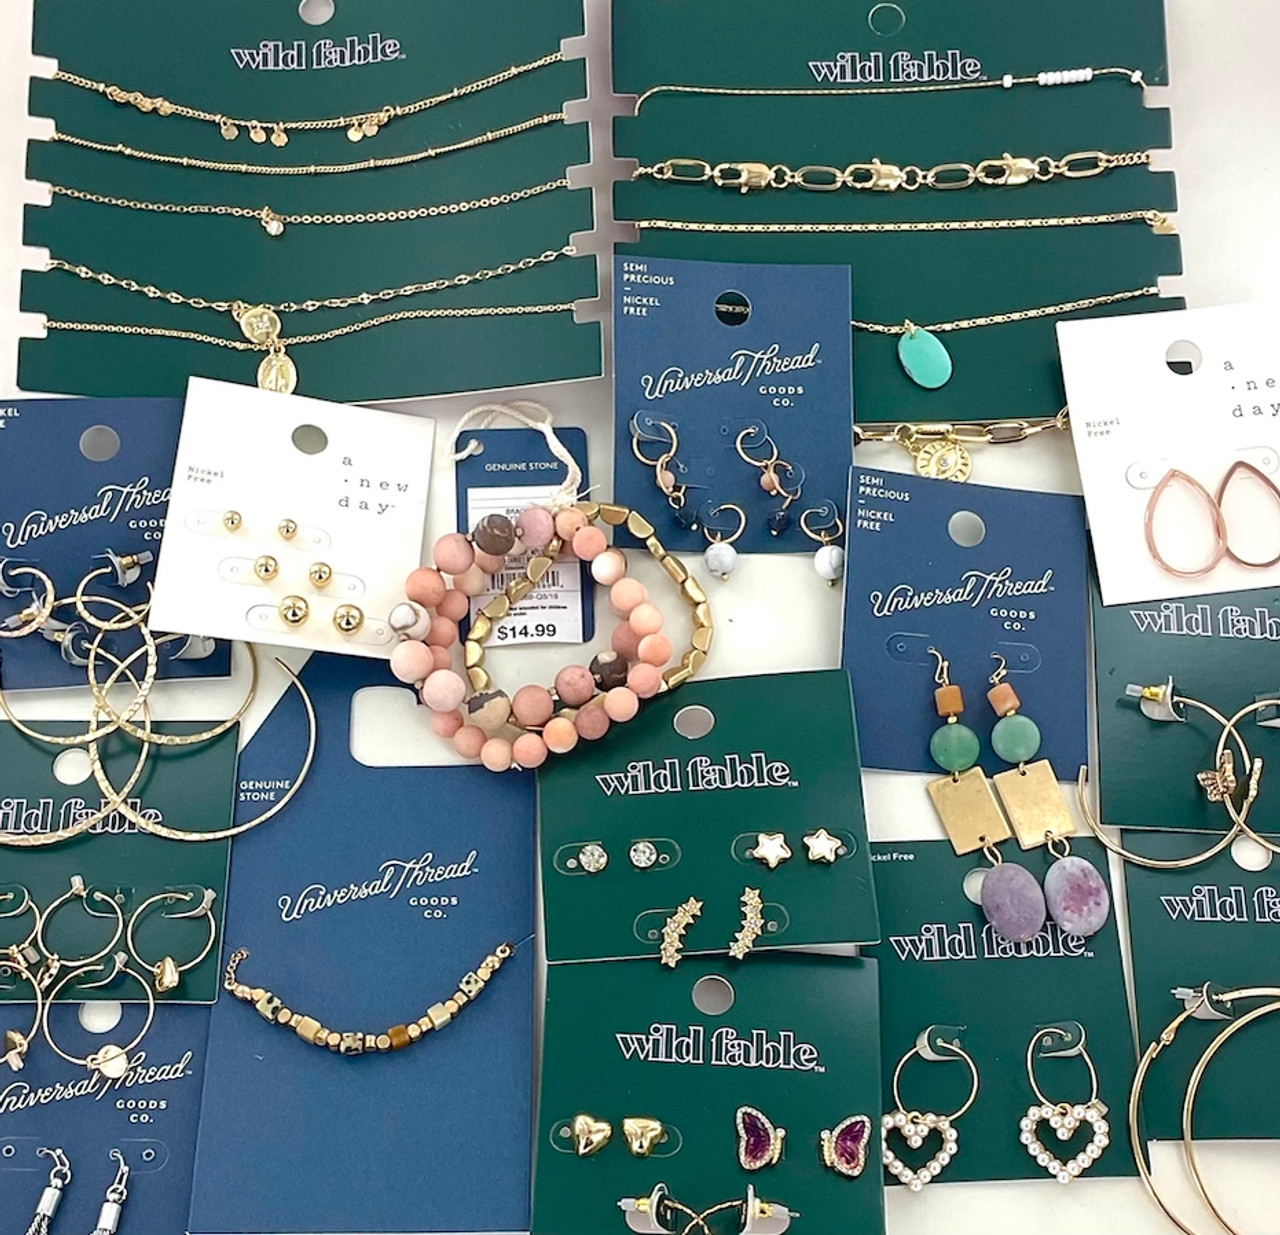 Wholesale Fashion Accessories & Jewelry Closeout Lot - 1000 Pieces 